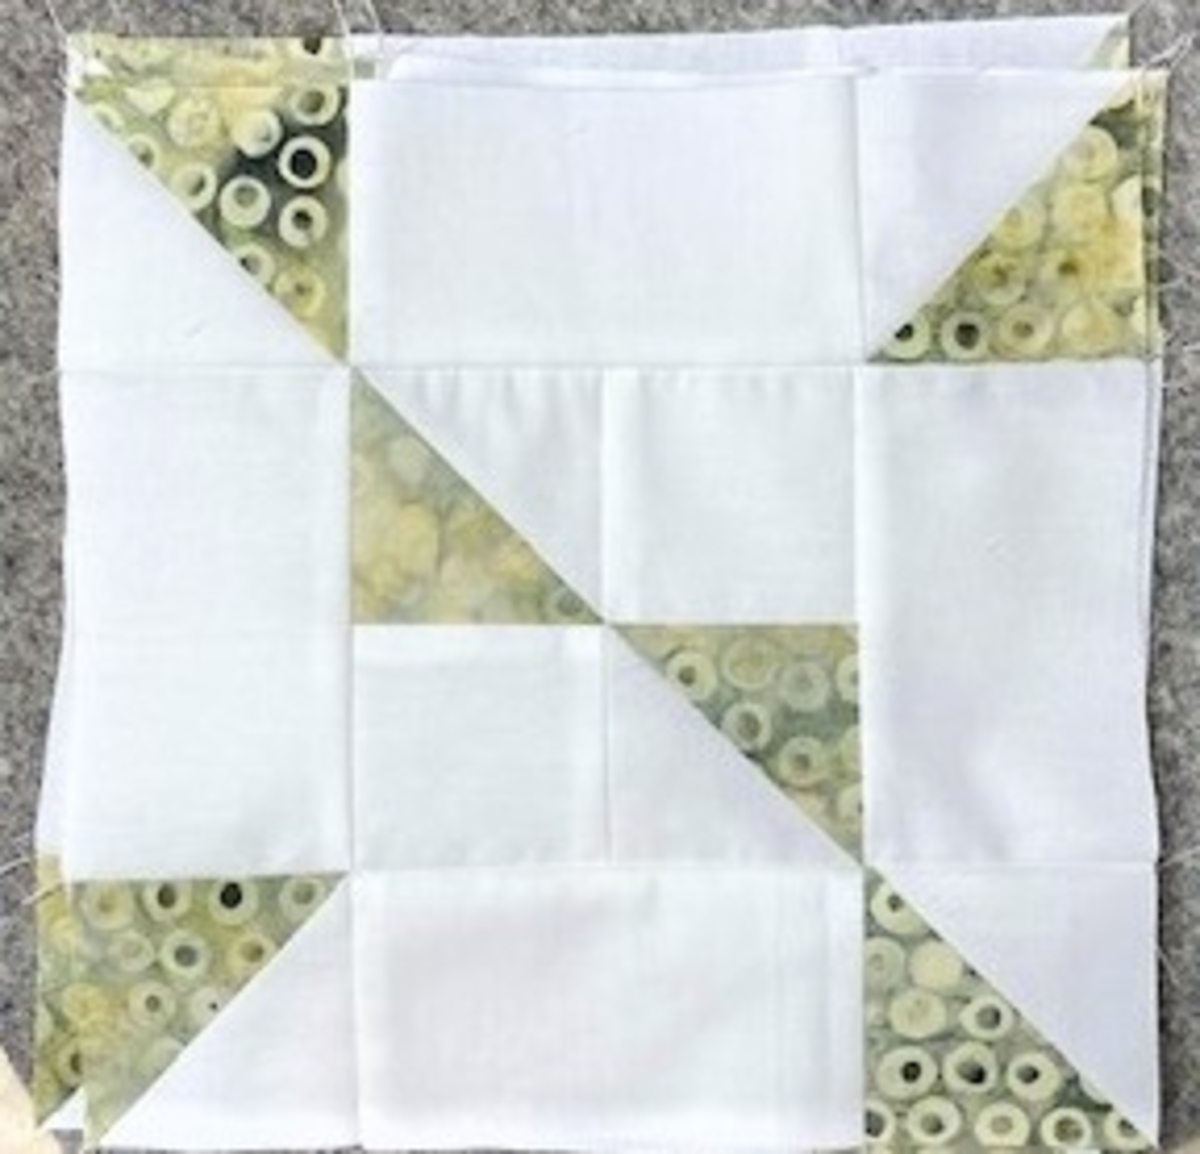 accuquilt half square triangle chain block with white and green and yellow batiks